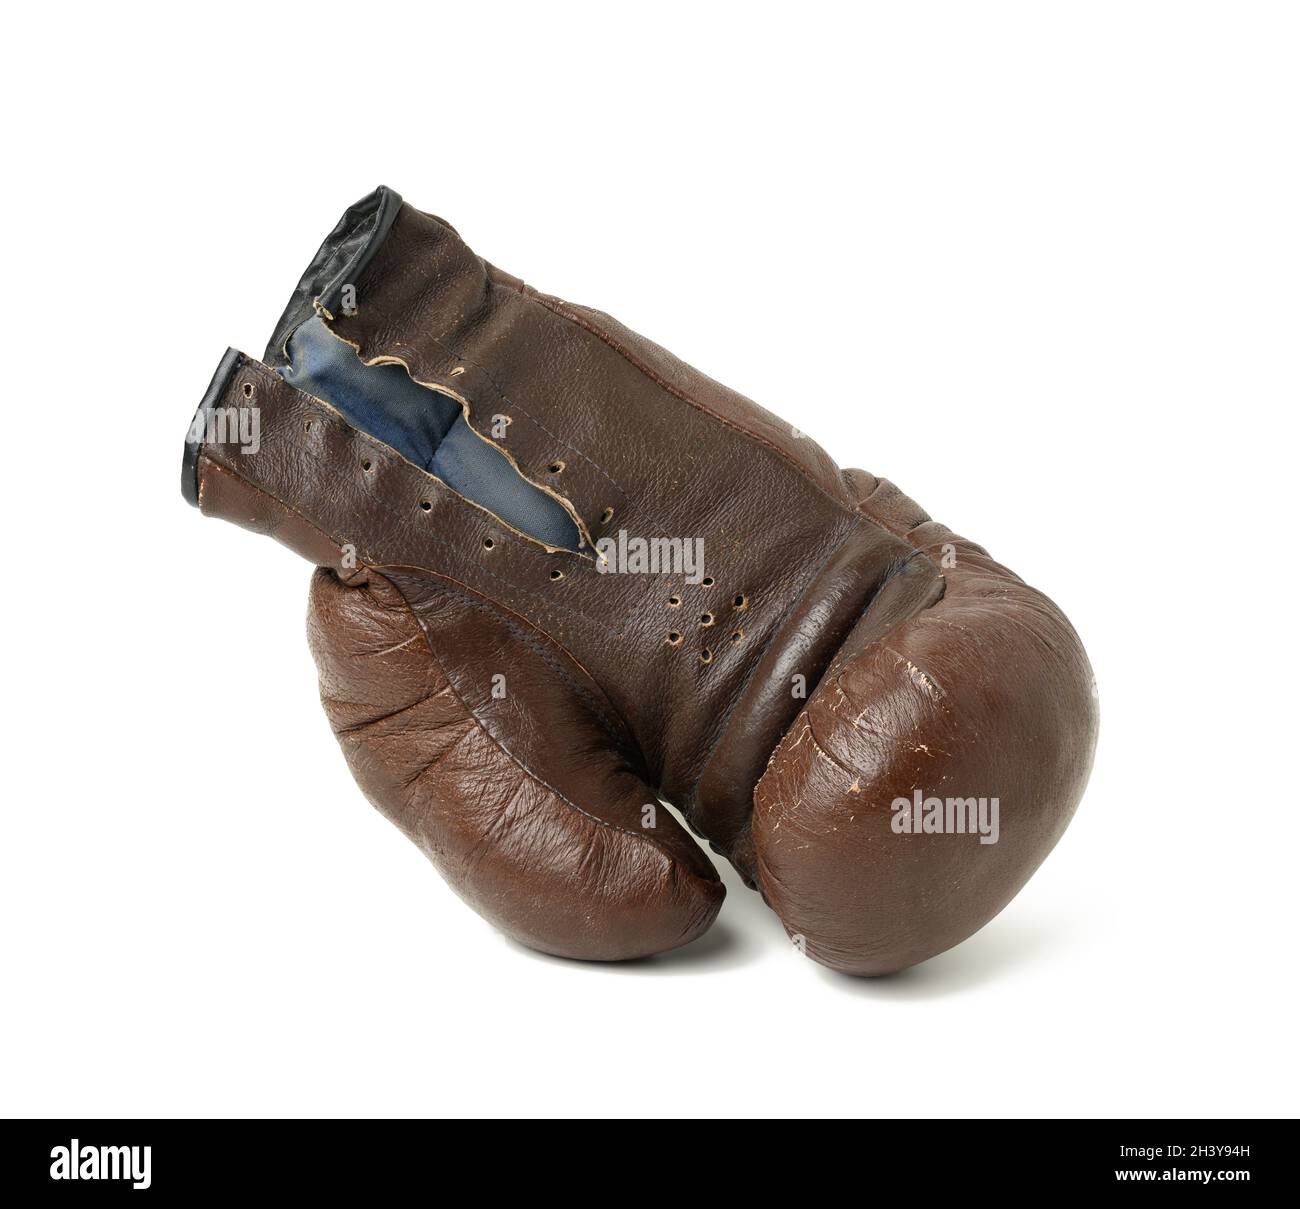 Very old vintage leather brown boxing glove isolated on white background. Sport equipment Stock Photo